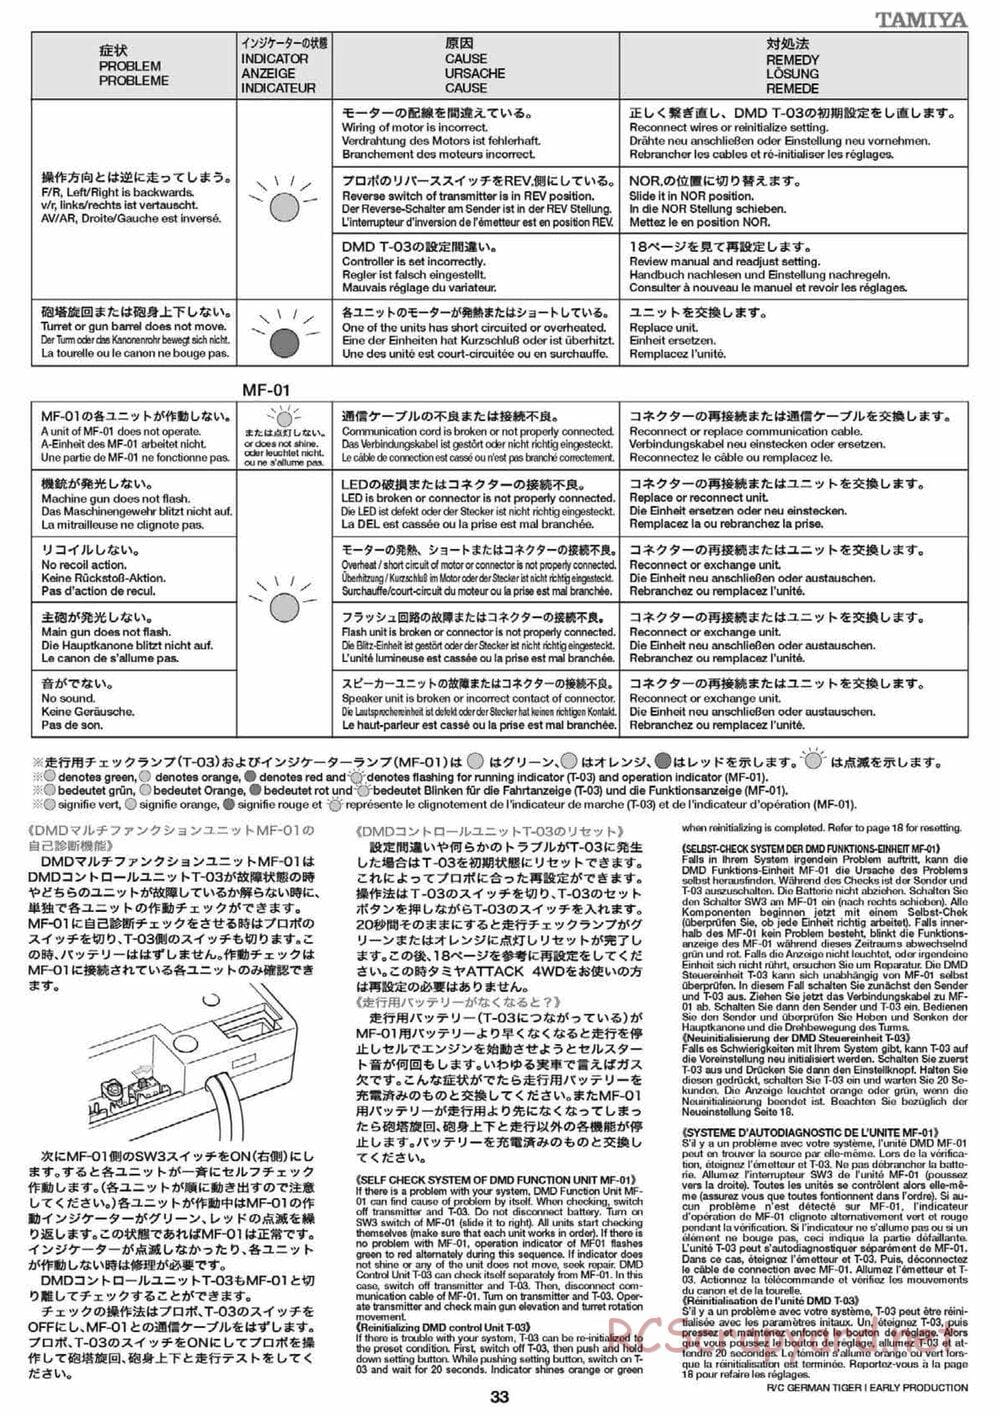 Tamiya - Tiger I Early Production - 1/16 Scale Chassis - Manual - Page 33